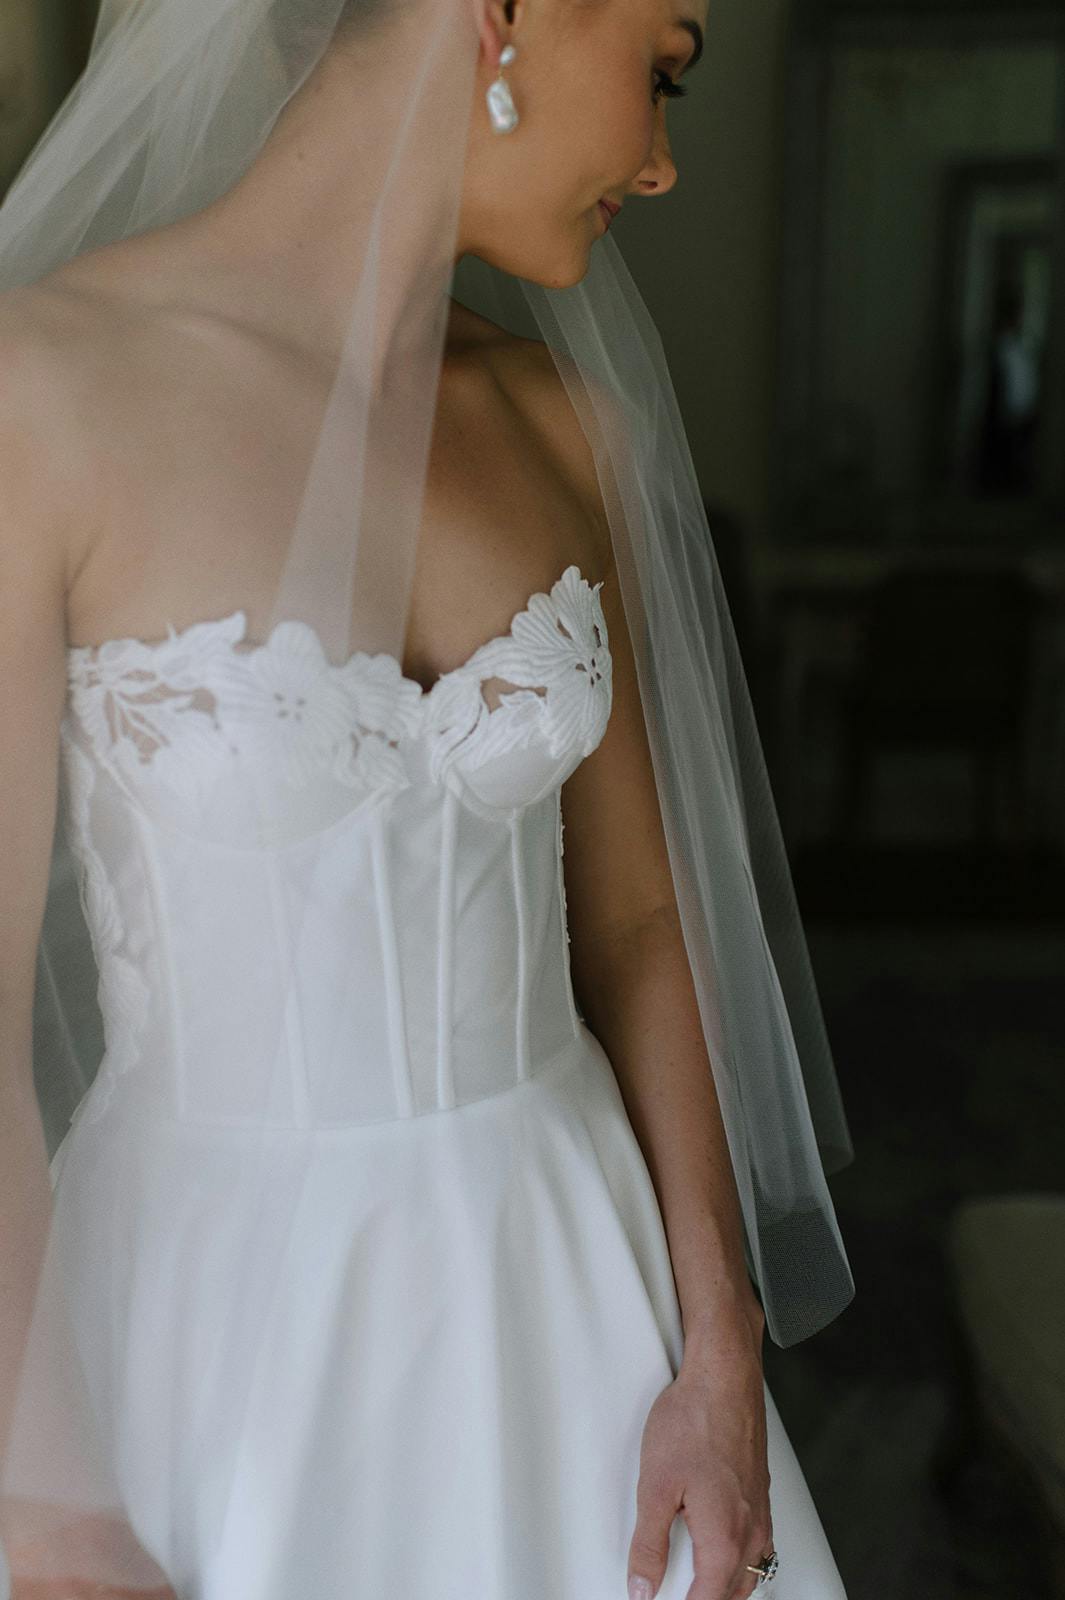 A bride stands in a white corset-style wedding dress adorned with lace flowers, wearing a delicate veil and pearl earrings. She has a hand on her hip, and her head is turned to the side, looking down with a smile. The background is softly blurred.